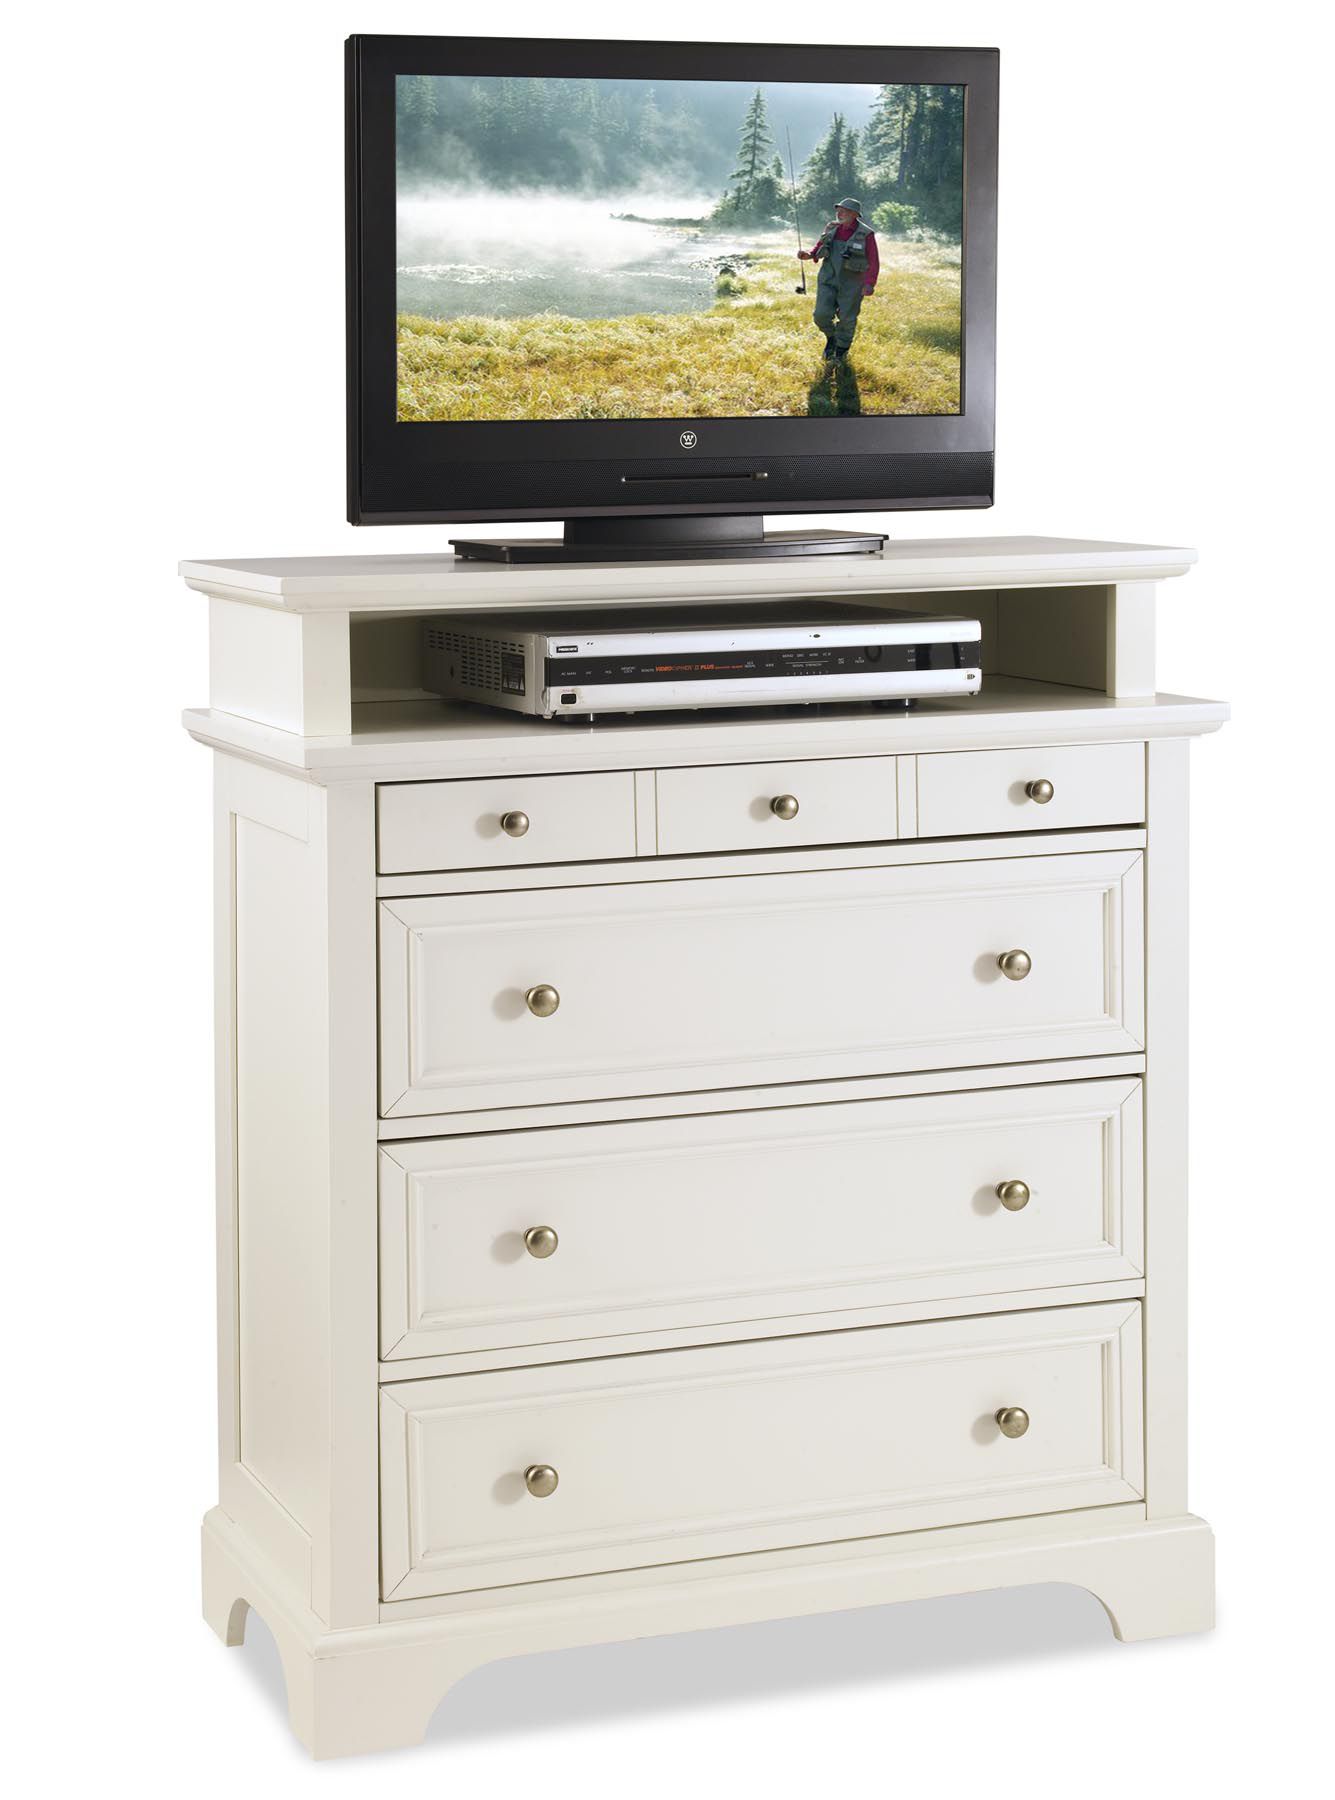 Kmart Fireplace Tv Stand Inspirational Tv Stands Sears Outlet